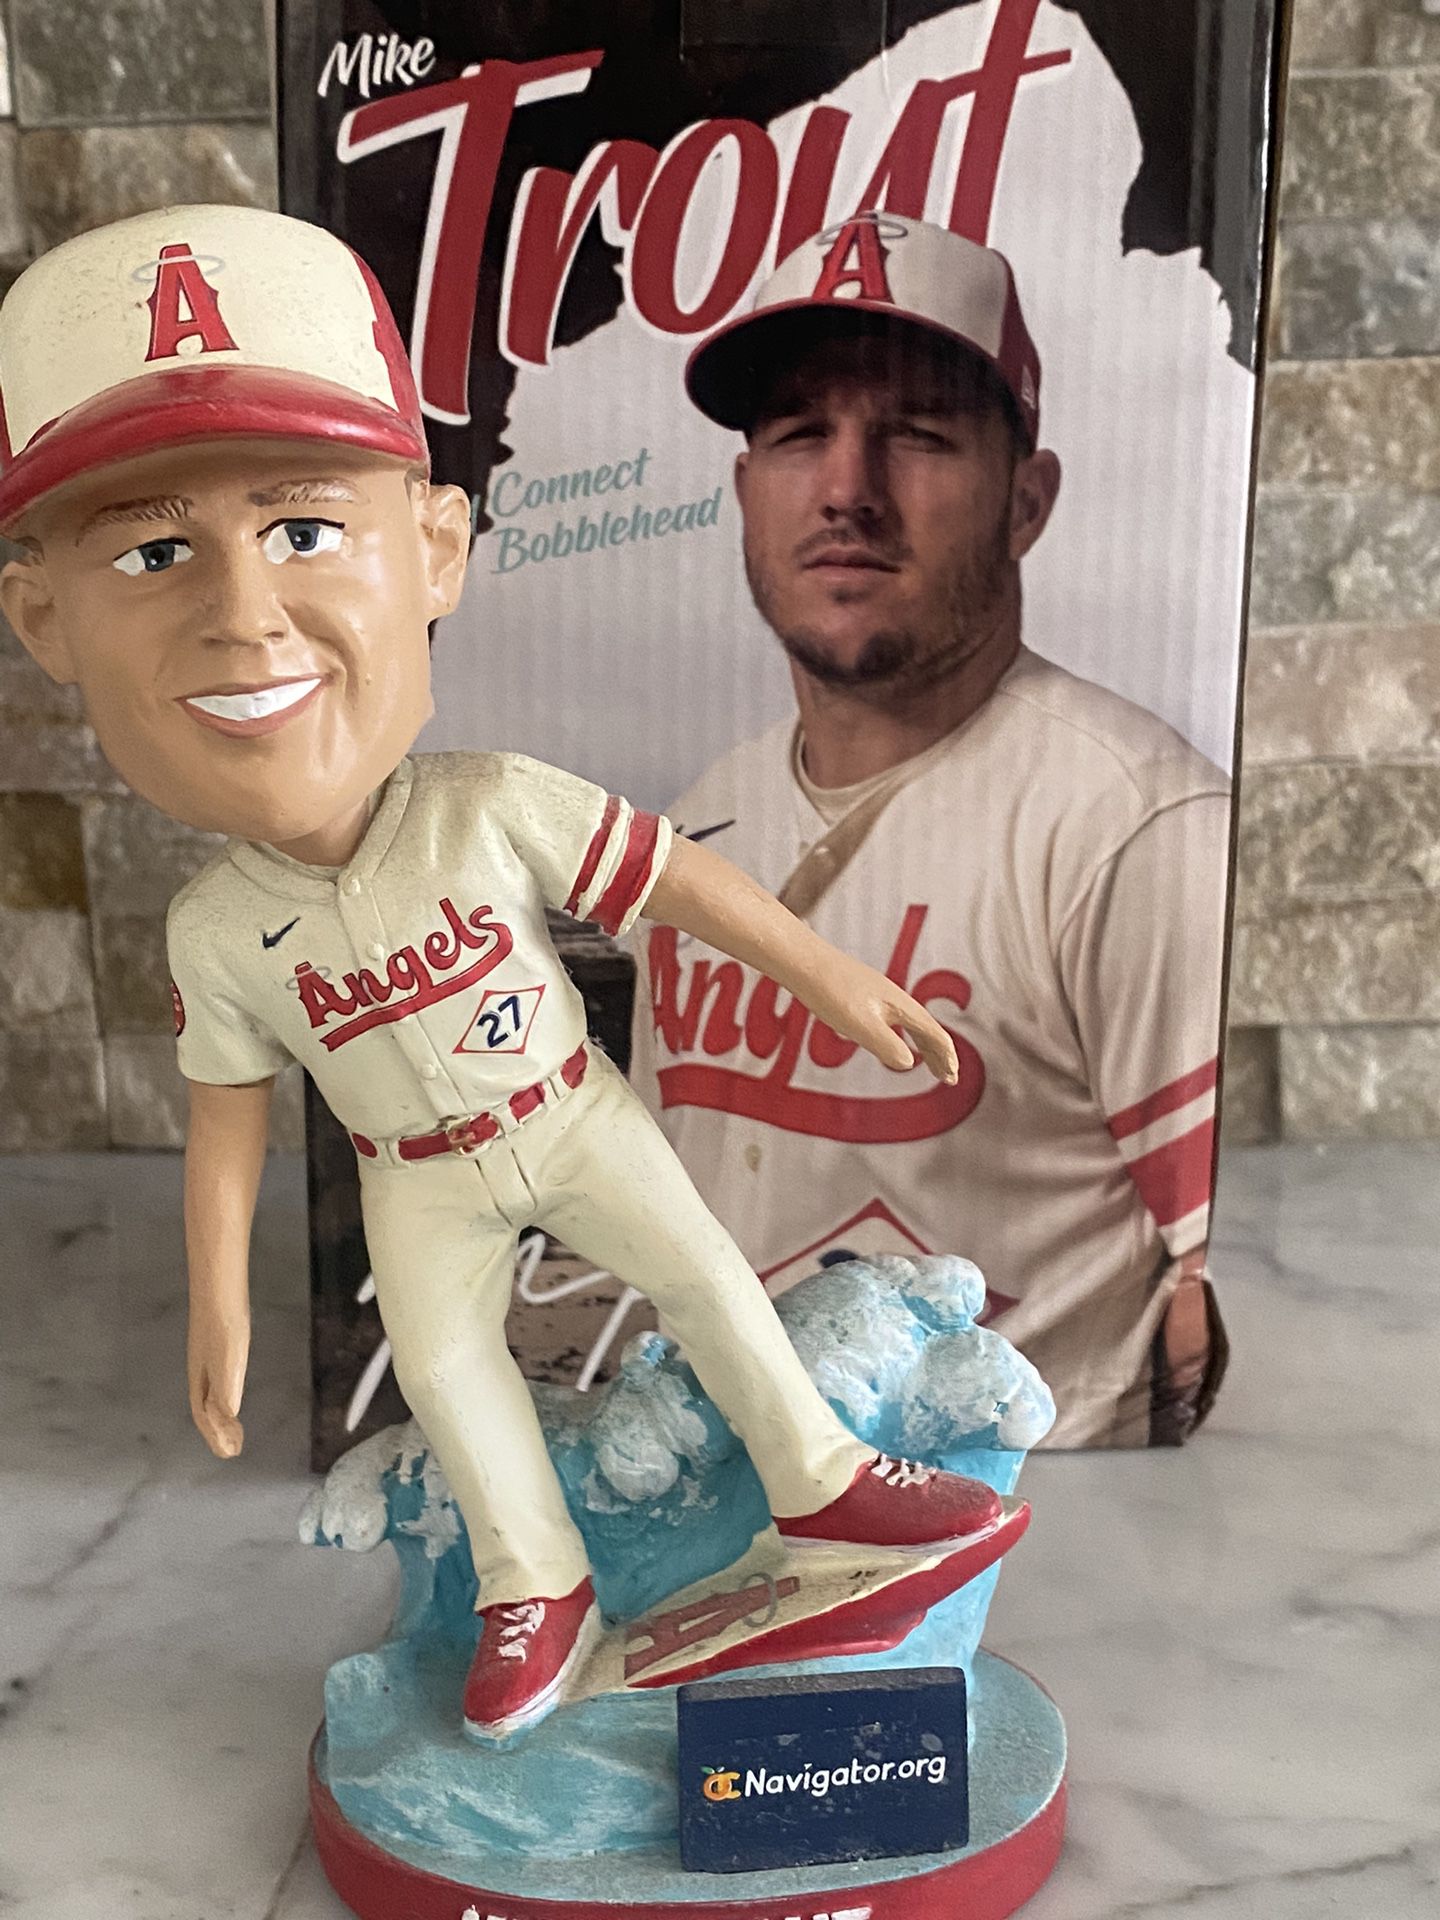 Mike Trout City Connect bobblehead